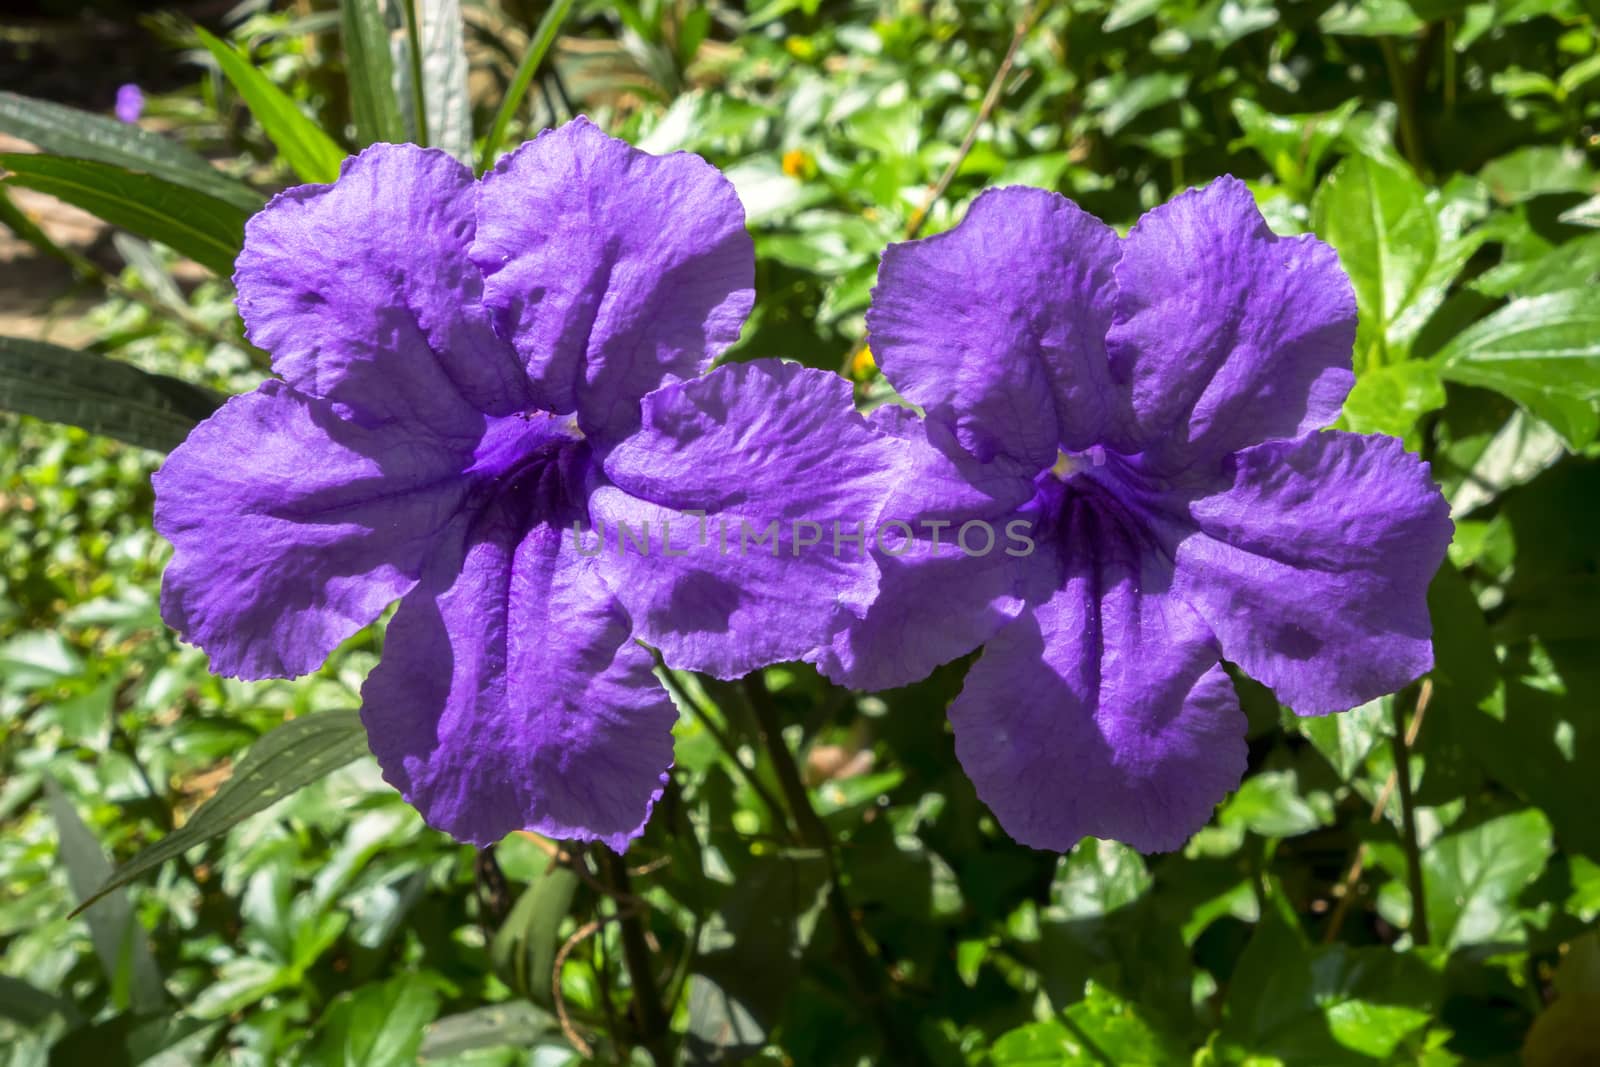 Two Ruellia Tuberosa Flowers. Also known as Minnie Root, Fever Root, Snapdragon Root and Sheep Potato